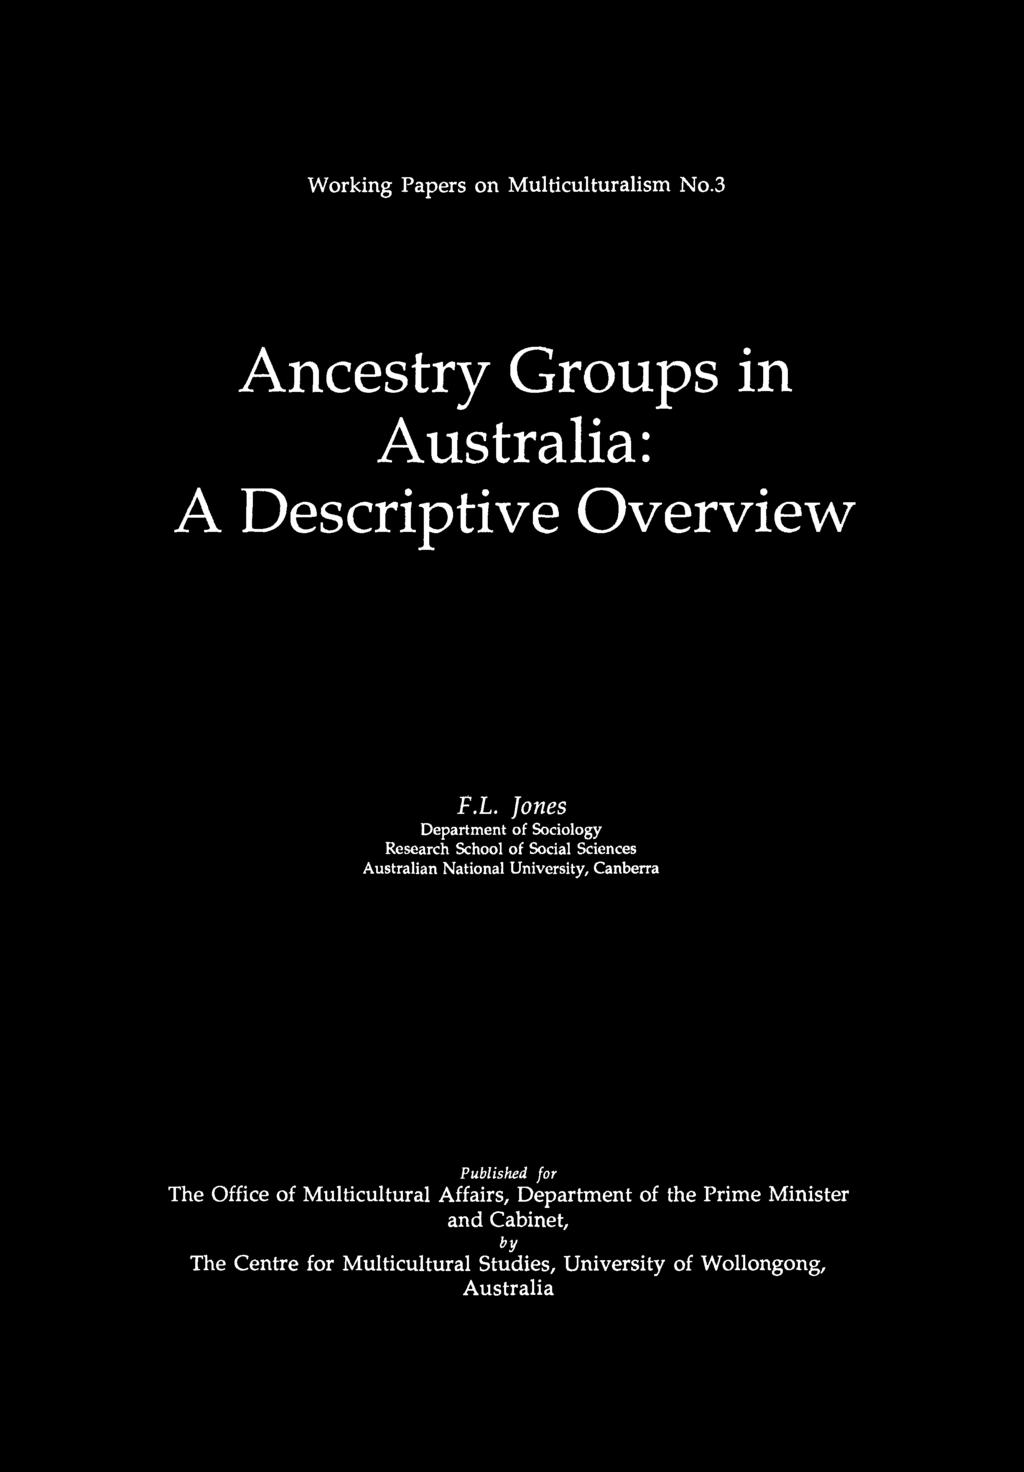 Working Papers on Multiculturalism No.3 Groups in Australia: A Descriptive Overview F.L.